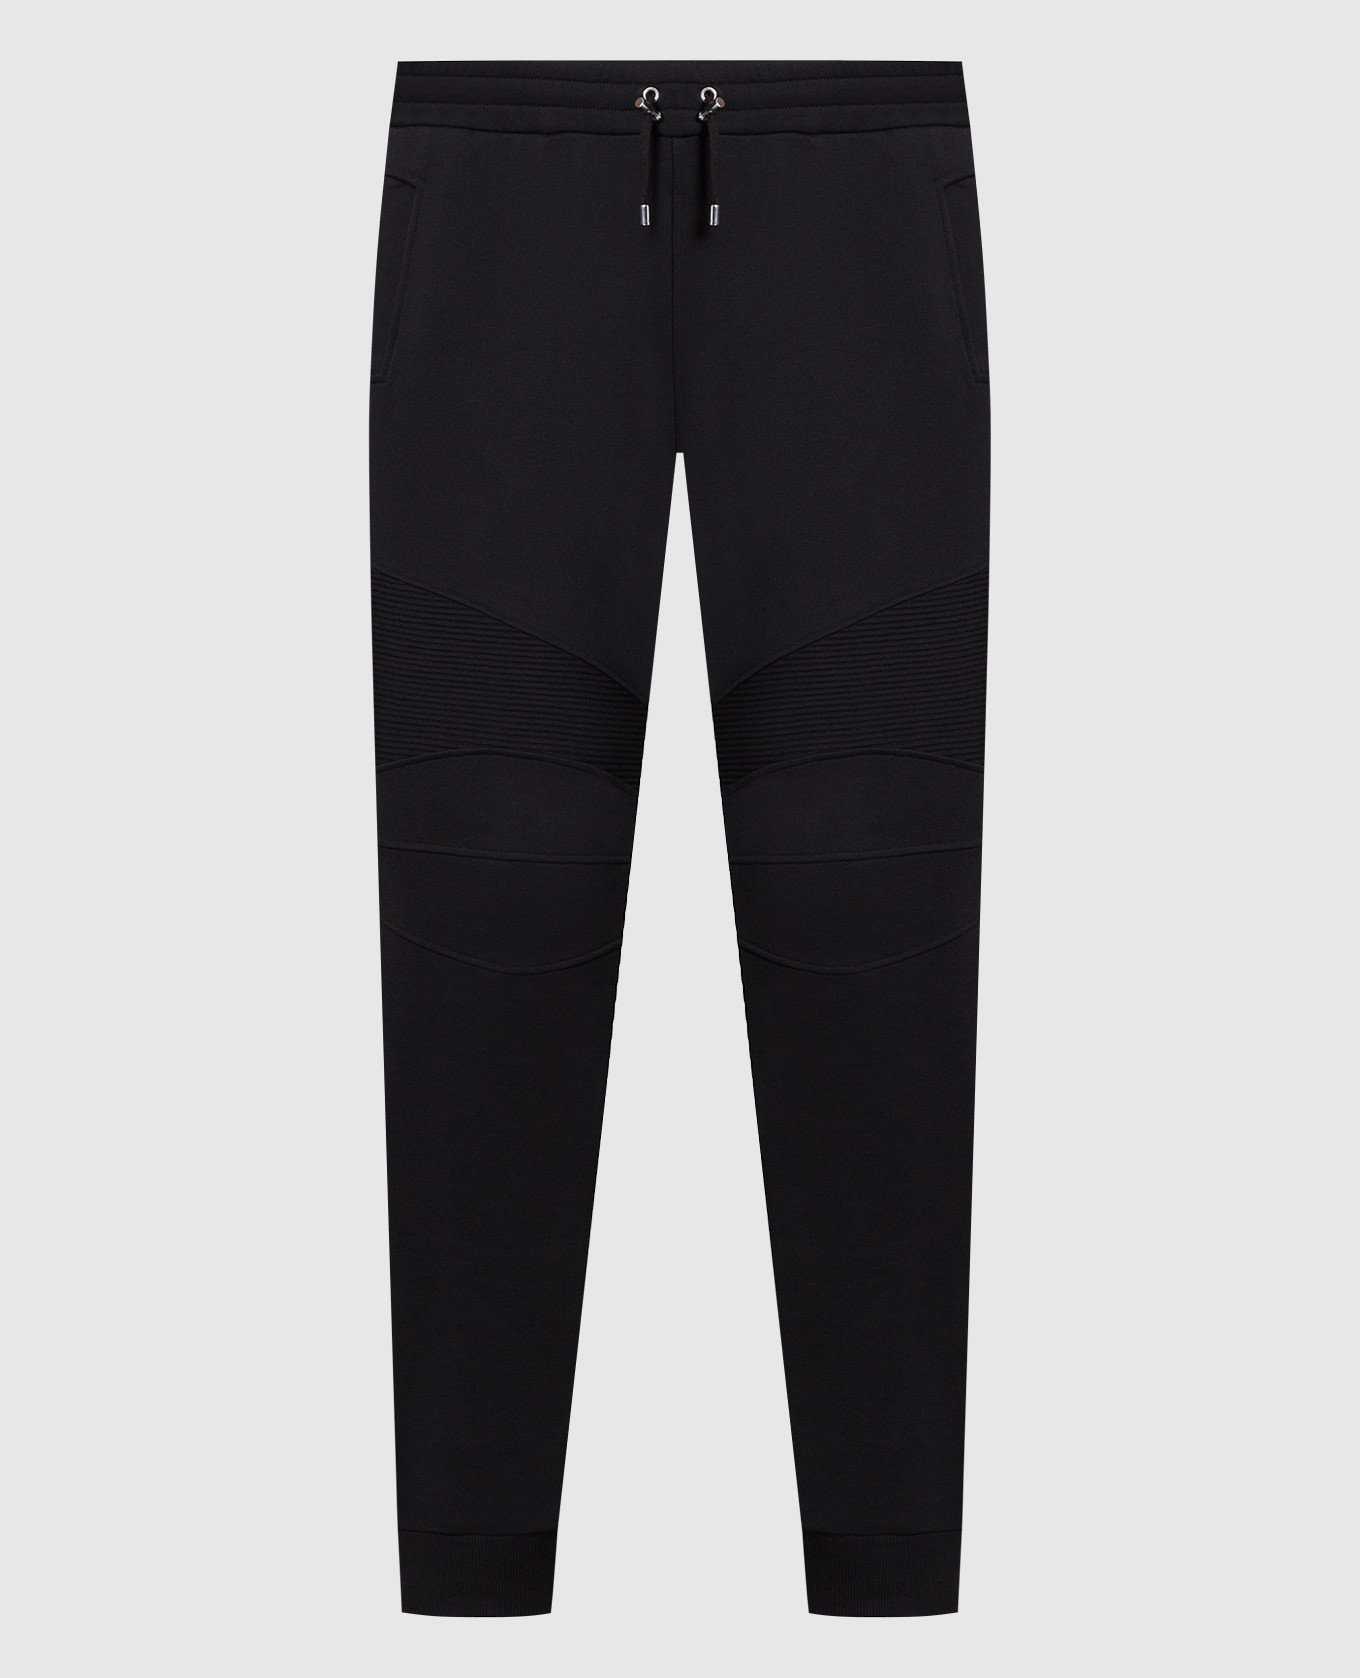 Black joggers with contrast logo